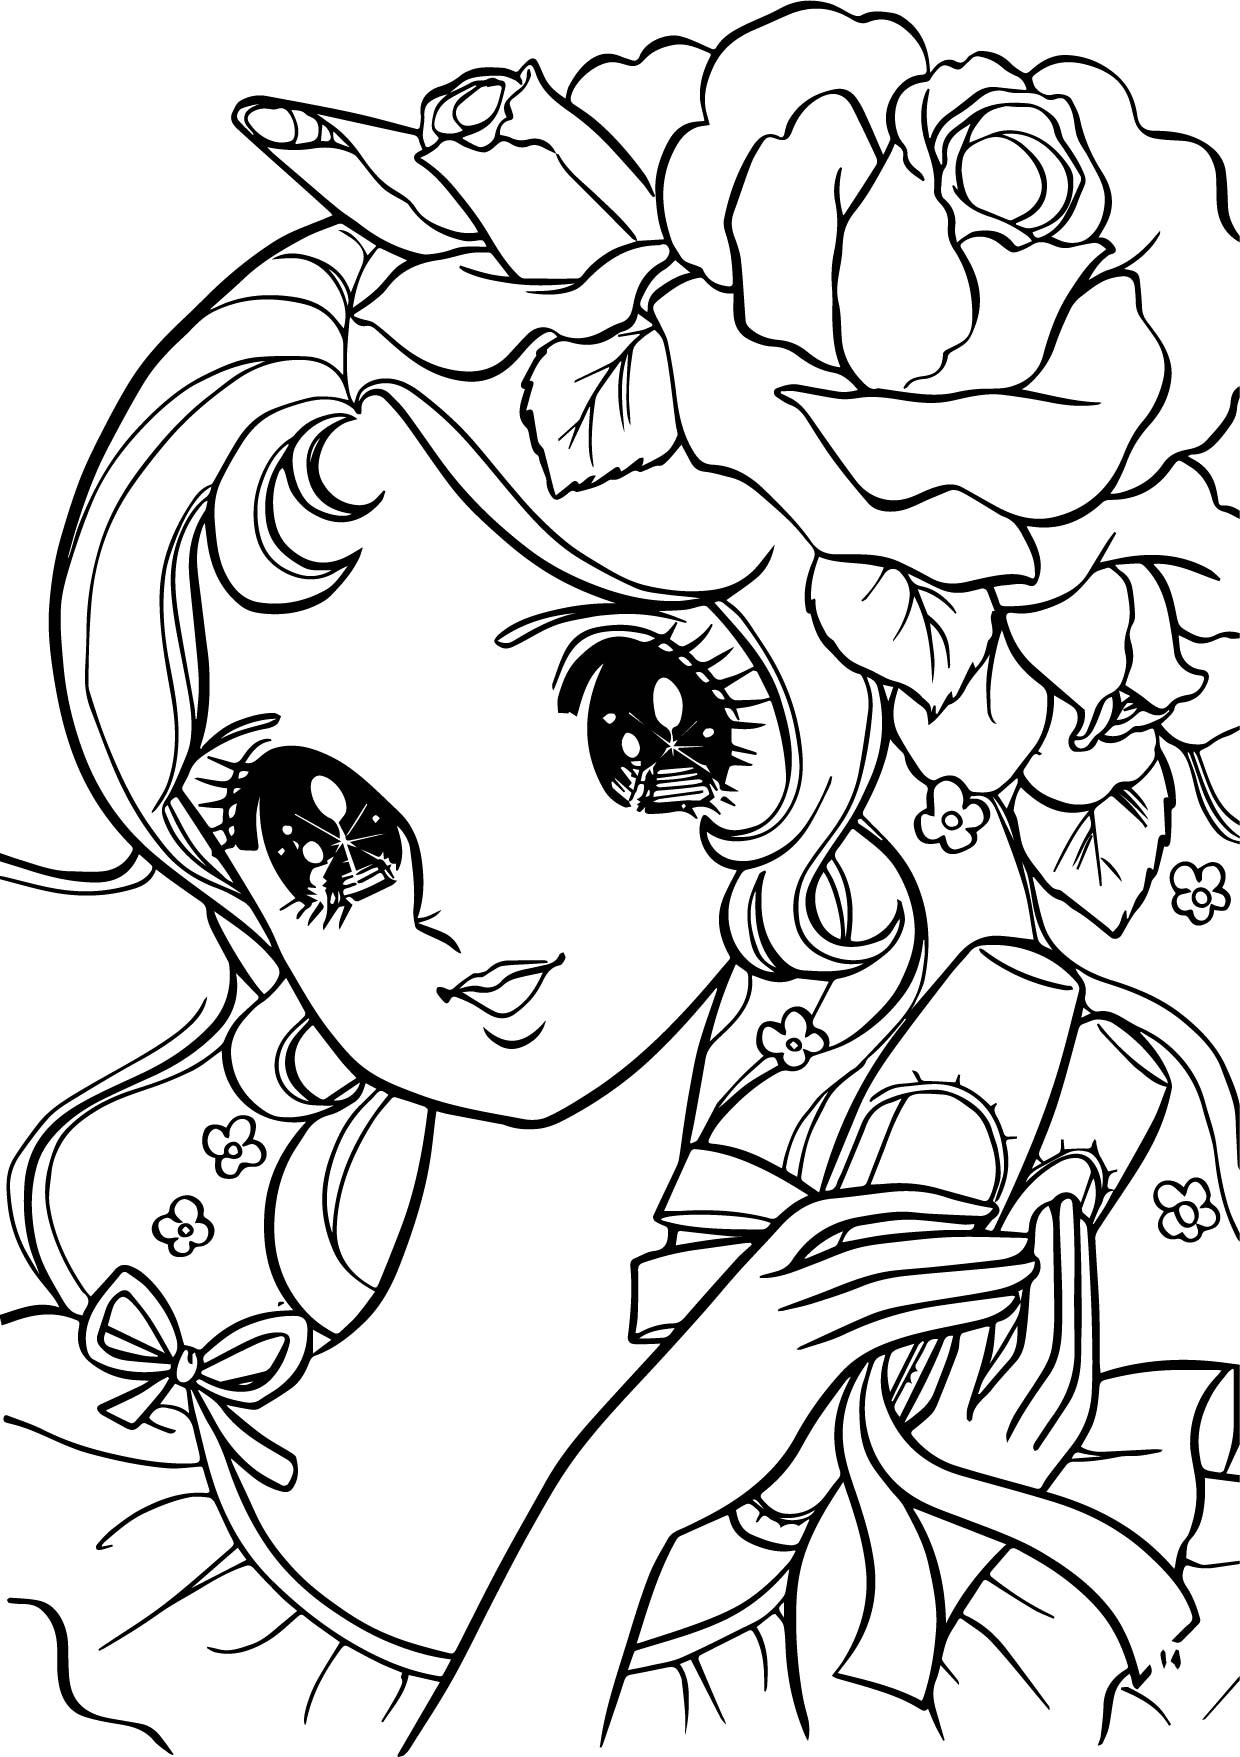 Girls Coloring Sheets
 Aeromachia Girl Flower Hair Coloring Pages